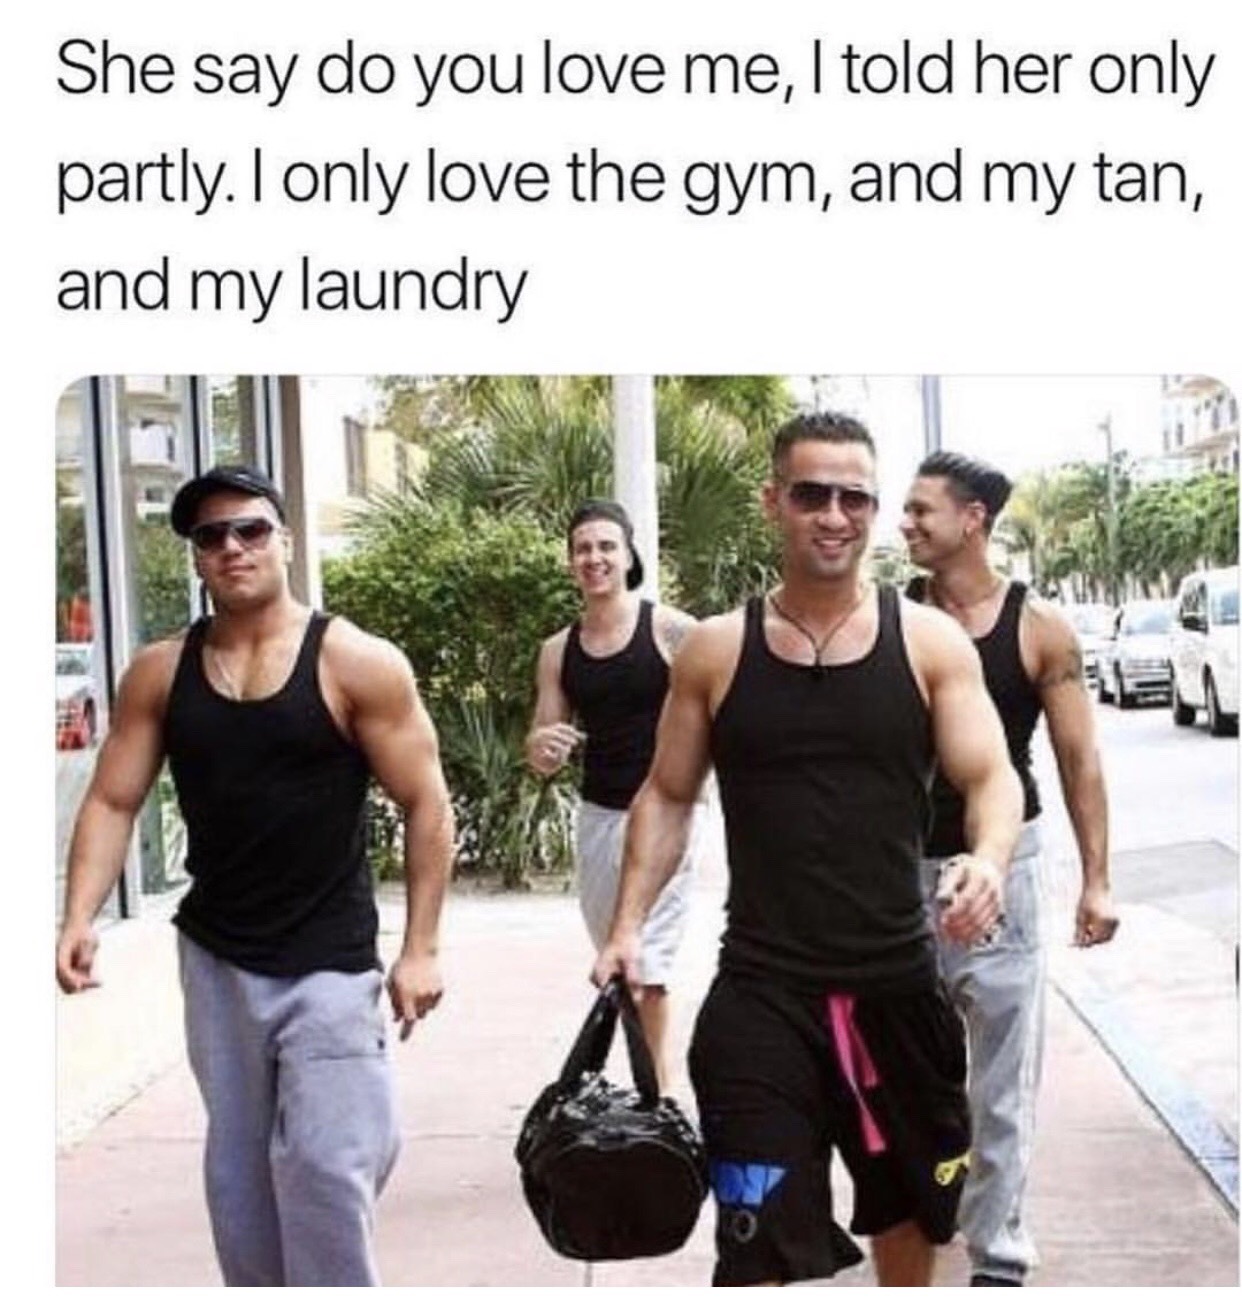 gtl jersey shore - She say do you love me, I told her only partly. I only love the gym, and my tan, and my laundry